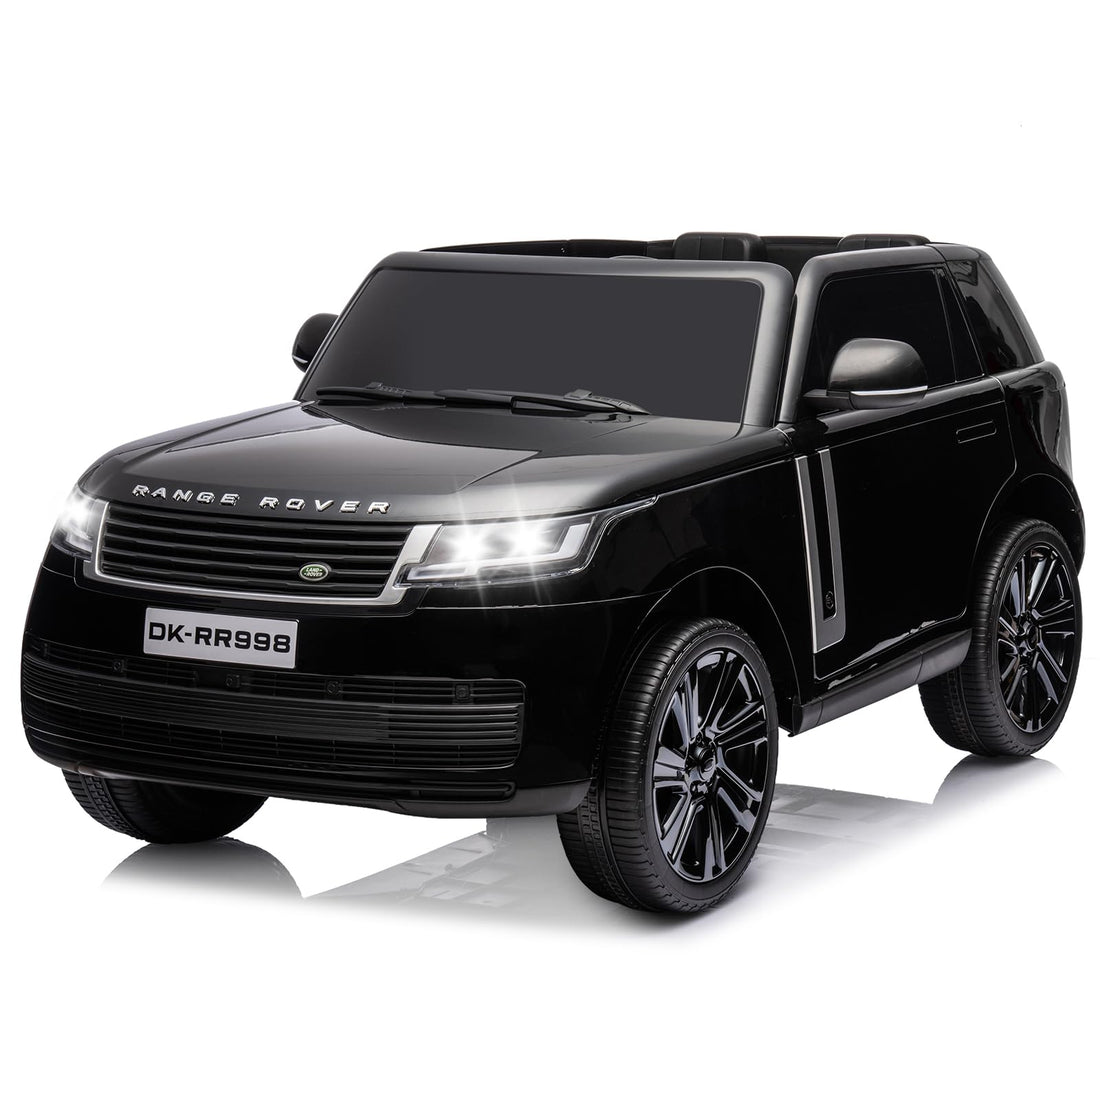 24V Land Rover Ride On Car, 2-Seater, MP3 Player, 3 Speeds